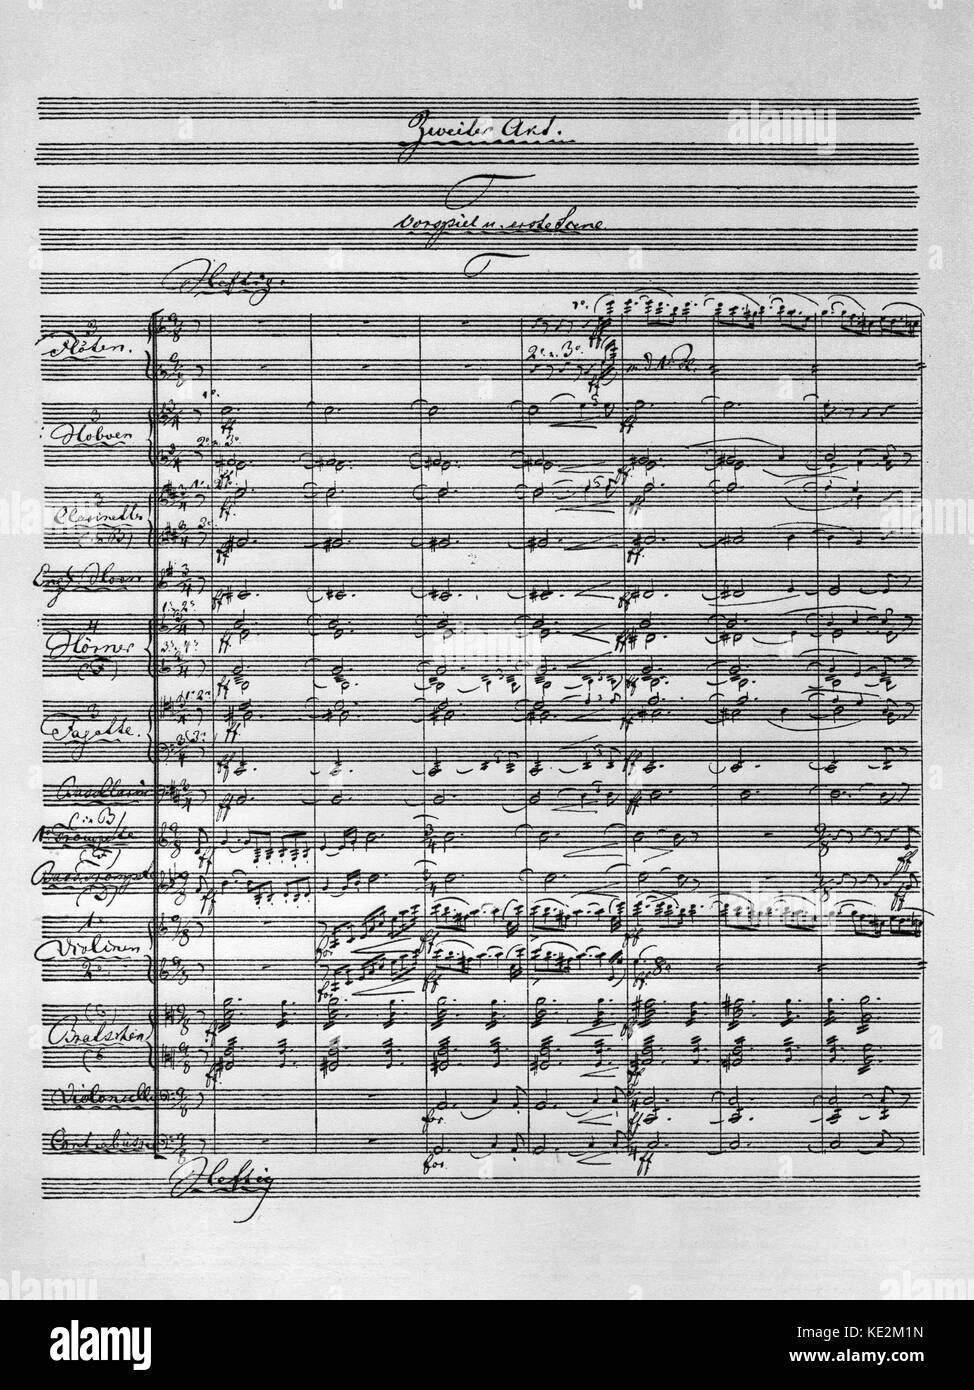 Richard Wagner 's 'Die Walküre' ('The Valkyrie'). Act 2 - page from original score. The second of the four operas in Der Ring des Nibelungen ('The Ring Cycle'), by Richard Wagner. It  premiered at the Munich Court Theatre on 26 June 1870. It is the source of the famous piece 'Ride of the Valkyries'. Stock Photo